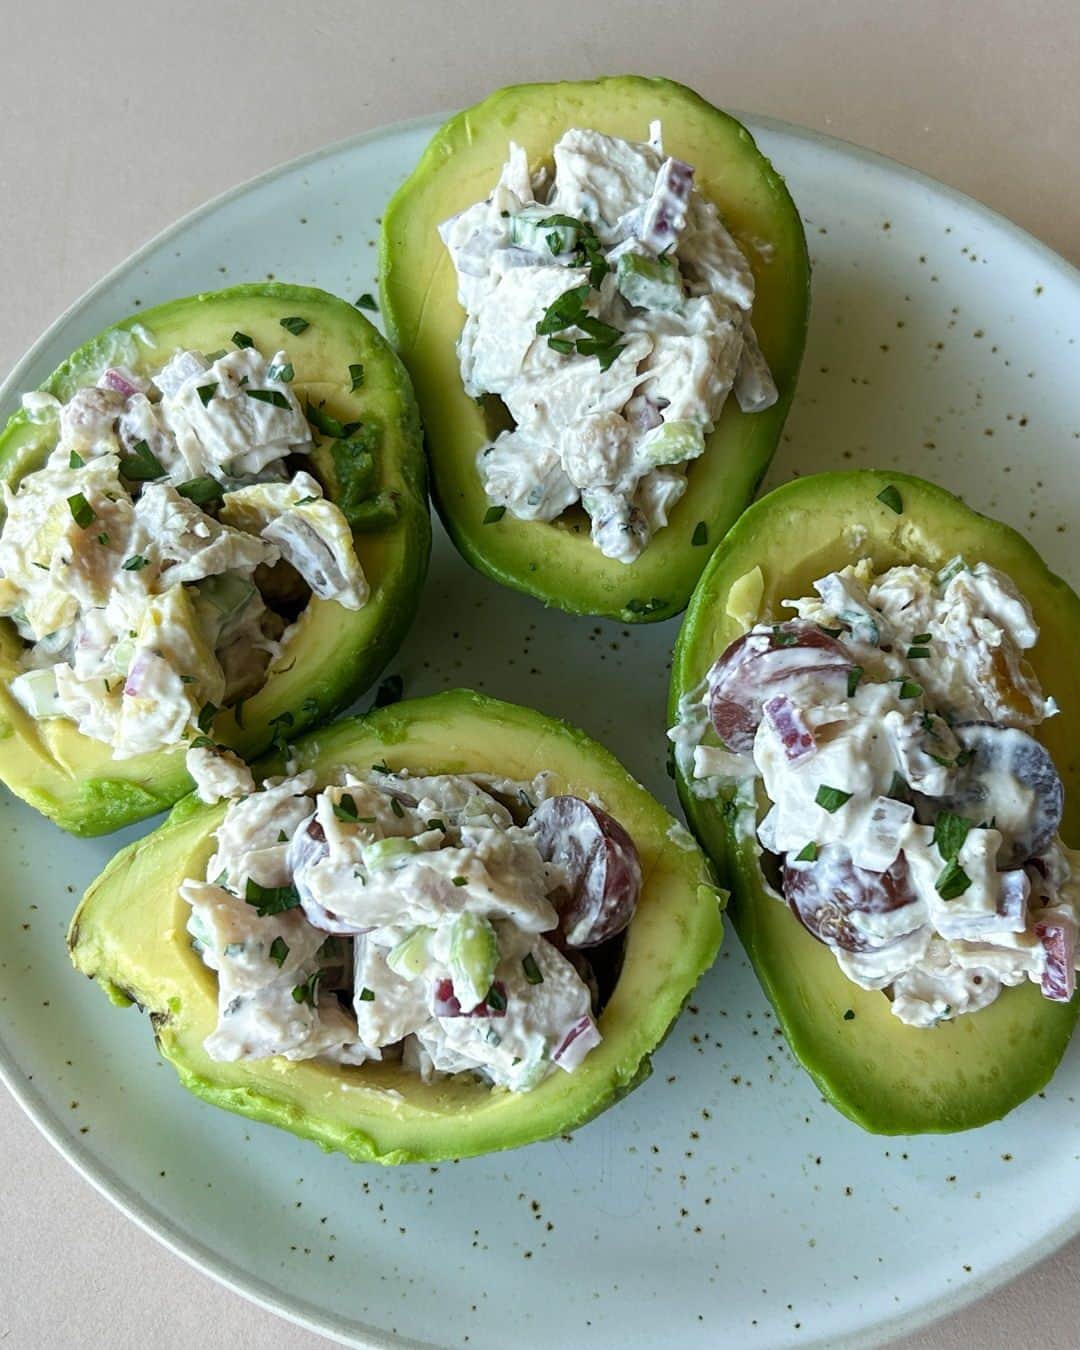 Food Republicのインスタグラム：「Chicken Salad-Stuffed Avocados Recipe   Classic chicken salad gets a creamy, tangy twist with the audition of chopped avocado and Greek yogurt...and then it's stuffed into an avocado.  Recipe developed in collaboration with @alexanderbakes   Prep Time: 15 minutes  Cook Time: 0 minutes  Servings: 4 servings   Ingredients: - ½ cup Greek yogurt - ½ cup mayonnaise - 1 teaspoon yellow mustard - 2 tablespoons lemon juice - 1 teaspoon salt - ¼ teaspoon ground black pepper - 4 cups cooked chicken, chopped - ¼ red onion, diced - 3 stalks celery, diced - 3 tablespoons chopped parsley, divided - 1 cup grapes, halved - ⅓ cup chopped walnuts - 2 medium-ripe avocados  Directions:  1. Add Greek yogurt, mayonnaise, yellow mustard, lemon juice, salt, and pepper to a large bowl. Whisk to combine.  2. Add the chopped chicken, onion, celery, 2 tablespoons parsley, grapes, and walnuts to the bowl. Mix until all ingredients are coated in dressing.  3. Cut avocados in half and remove pits. Carefully remove peel, leaving the avocados in full halves.  4. Scoop out 2 spoonfuls of the avocado meat, leaving the avocado half intact.  5. Chop up the scooped-out avocado and stir it into the chicken salad.  6. Fill the avocado halves with a large spoonful of chicken salad.  7. Garnish with remaining parsley and serve immediately.  -  #recipes #recipeoftheday #cooking #easyrecipe #delicious #food #yum #easyrecipes #yummy #healthyrecipe #instafood #healthyrecipes #foodie #tasty #homemade」